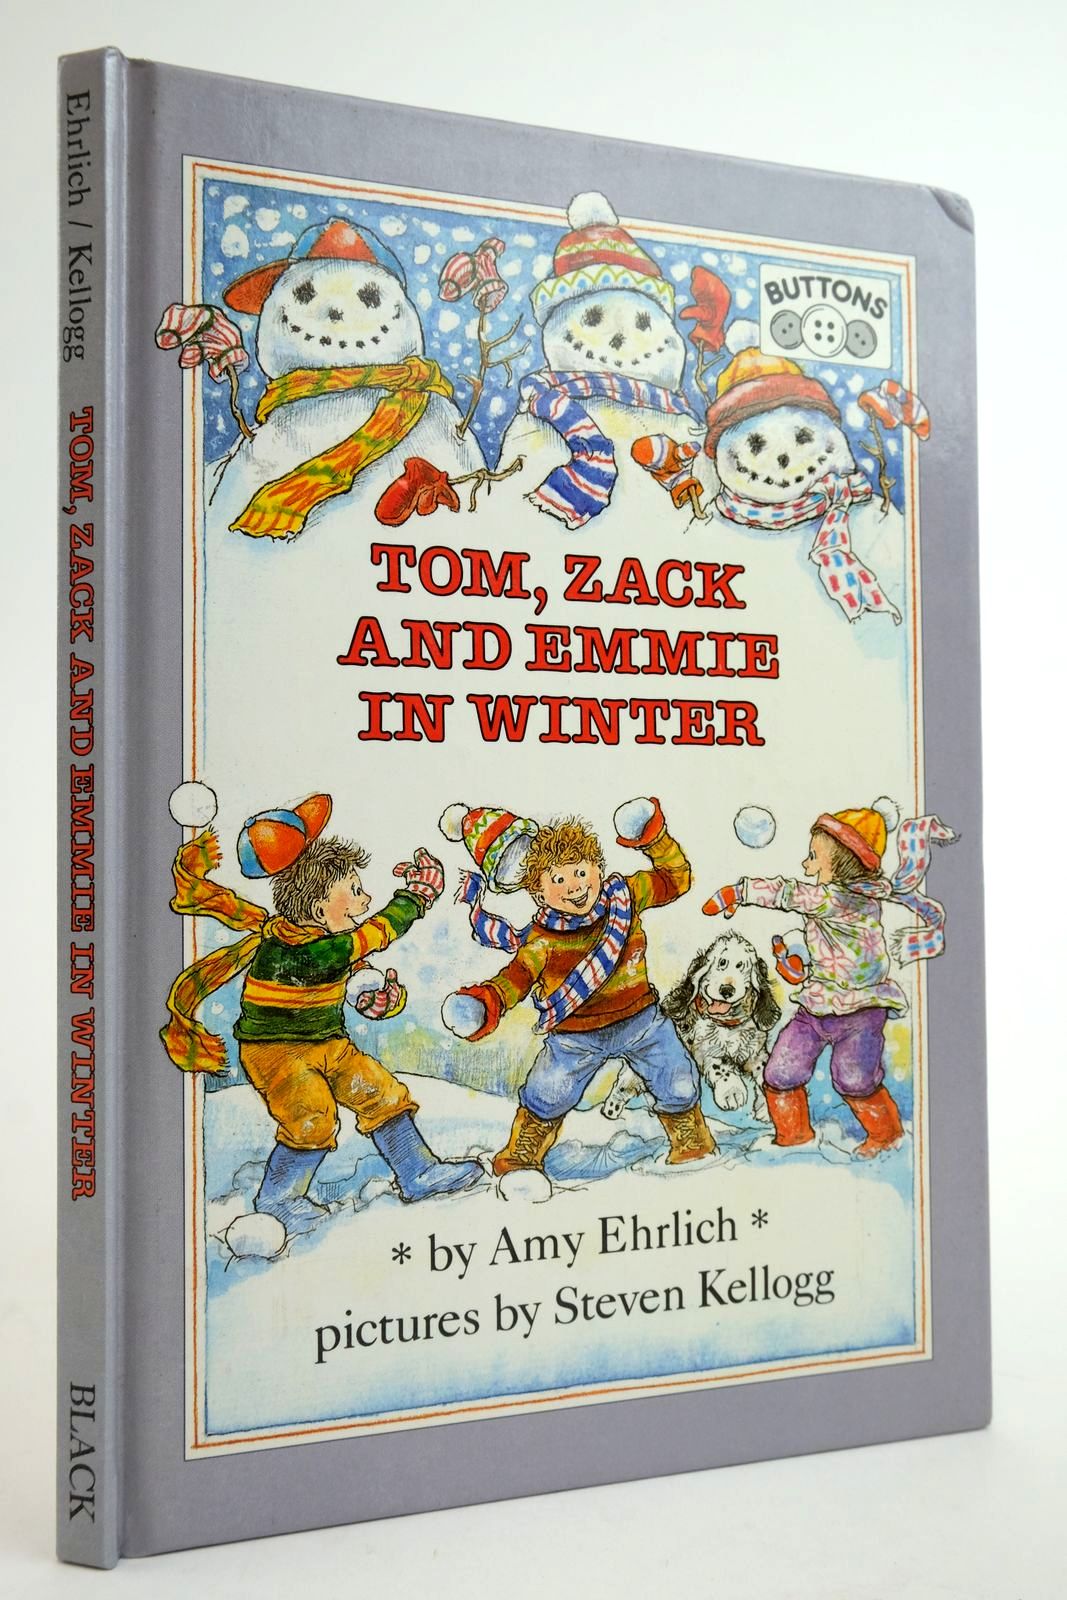 Photo of TOM, ZACK AND EMMIE IN WINTER written by Ehrlich, Amy illustrated by Kellogg, Steven published by A. &amp; C. Black (STOCK CODE: 2135461)  for sale by Stella & Rose's Books